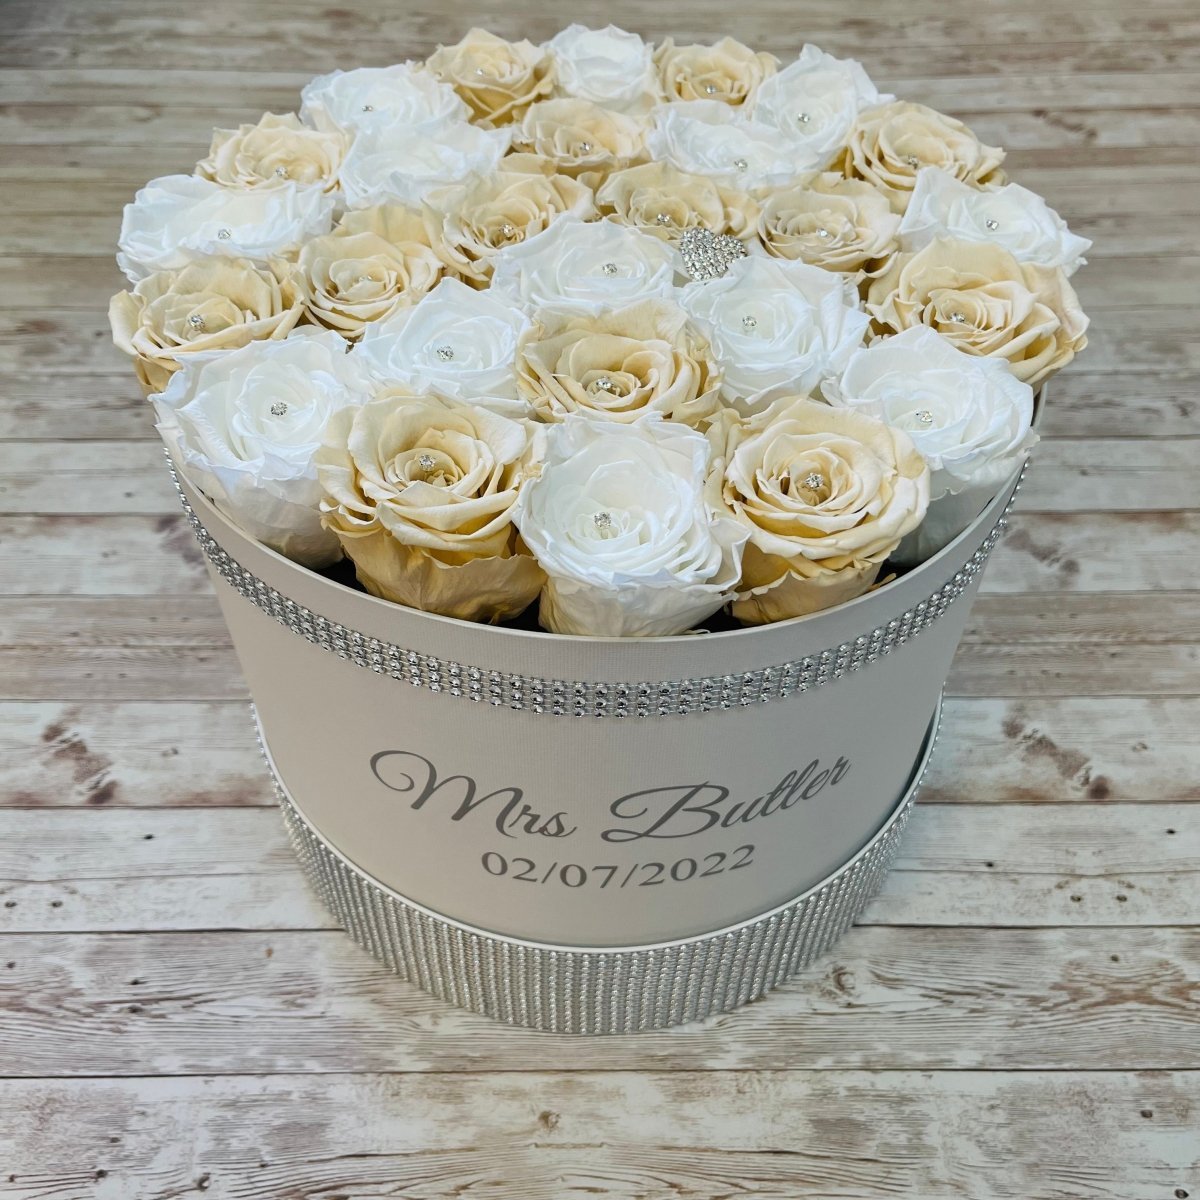 Infinity Roses - Enchanting Extra Large Infinity Rose Box - White and Champagne One Year Roses - Silver Diamanté